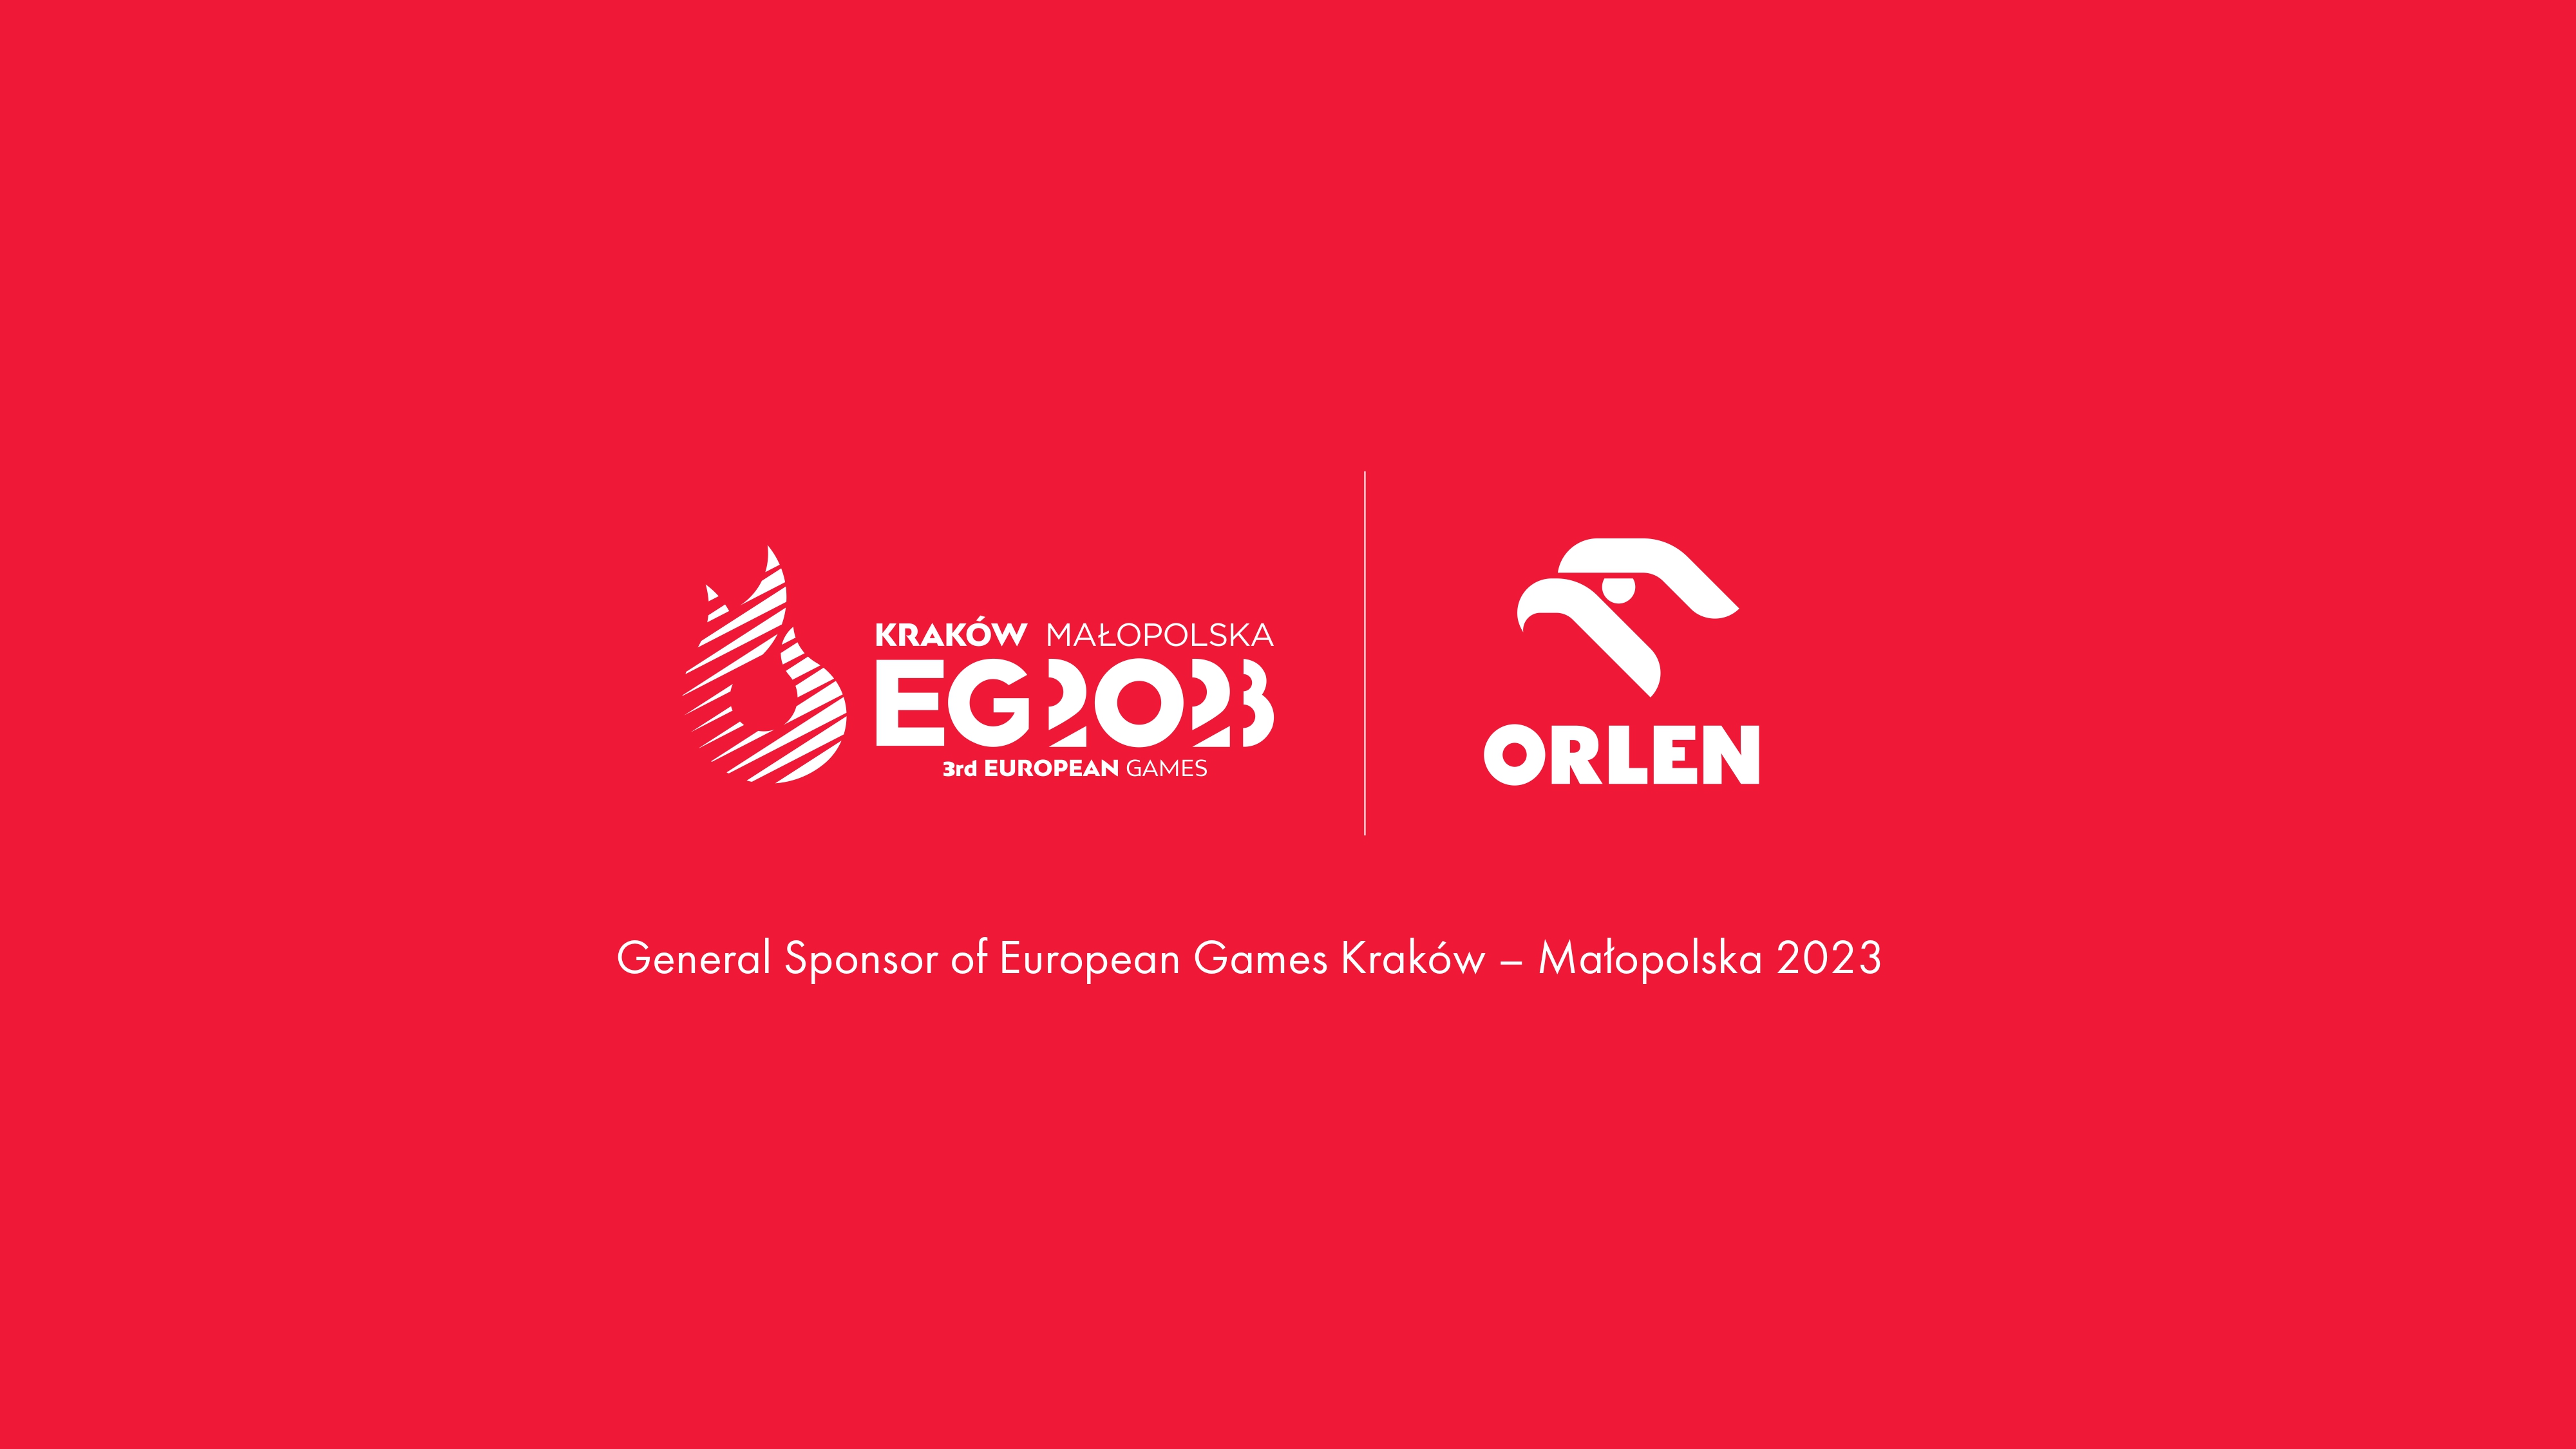 PKN ORLEN becomes the General Sponsor of the European Games